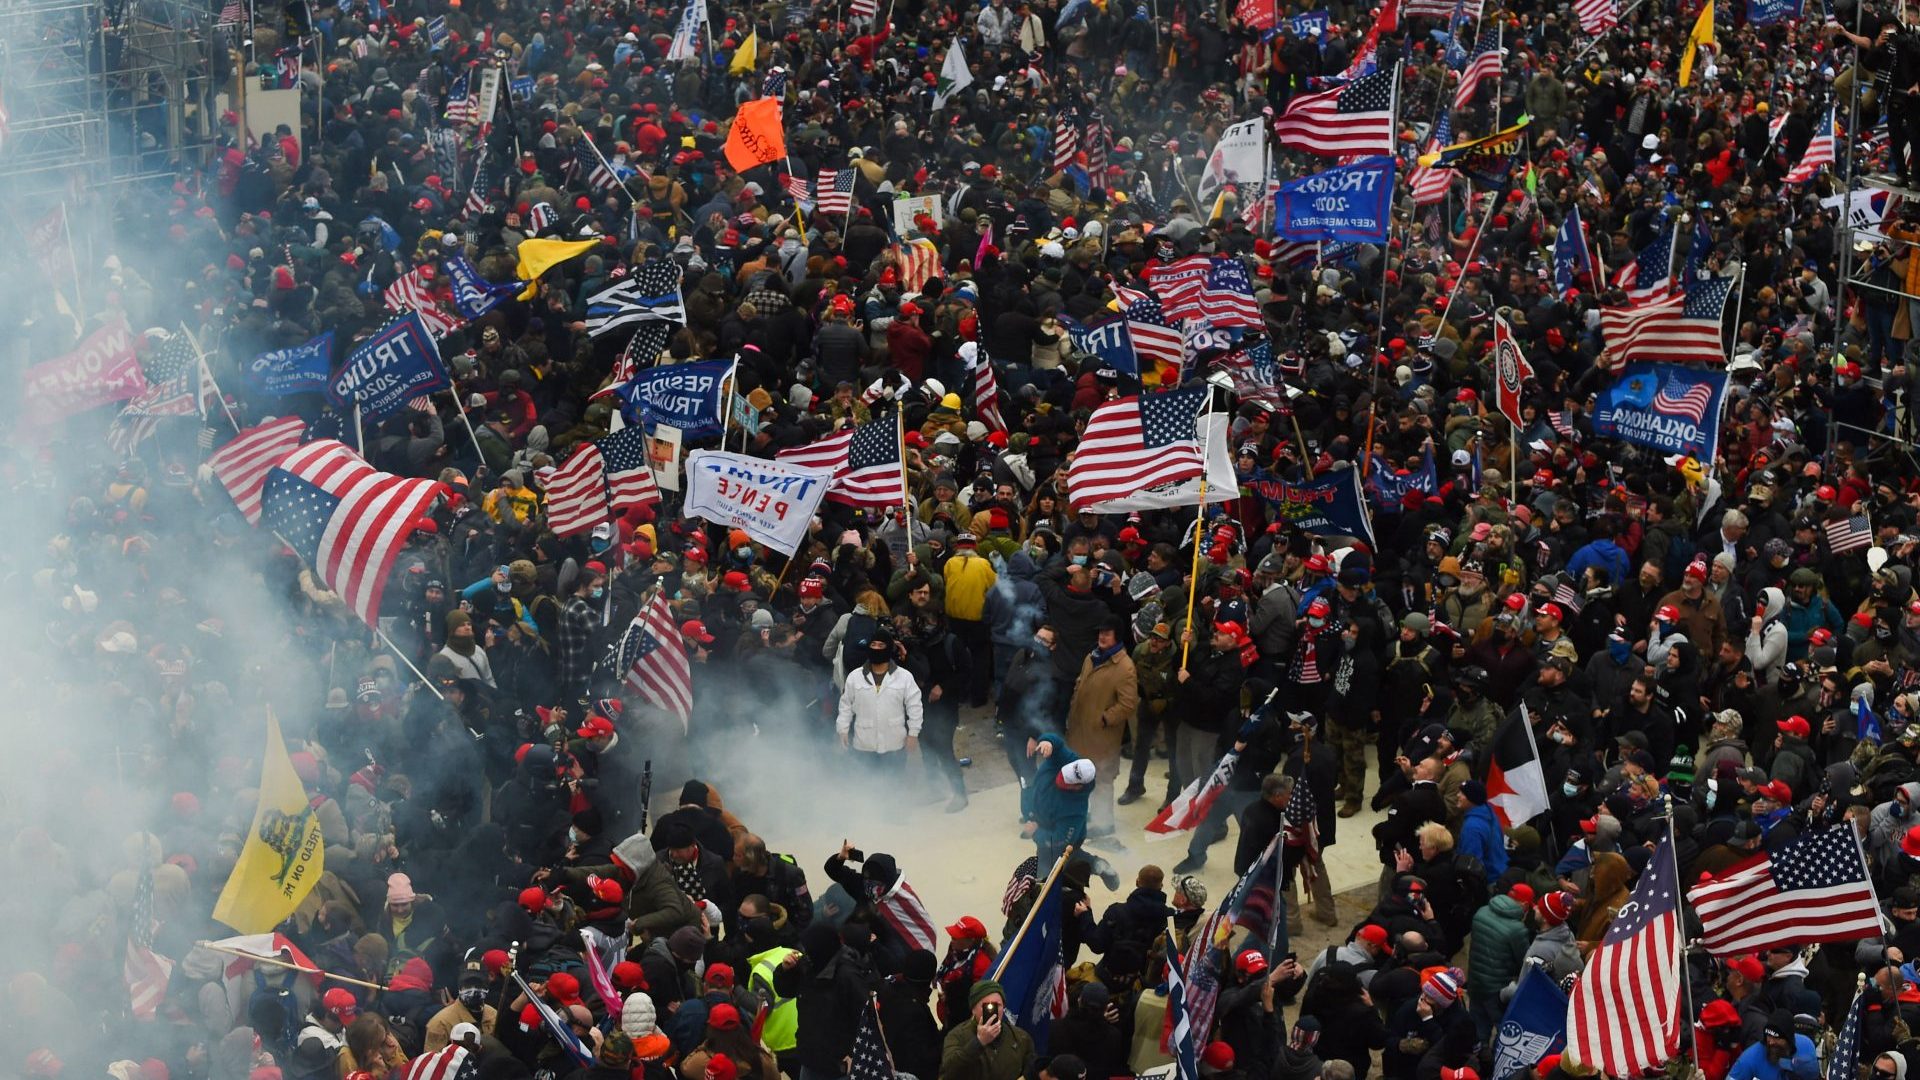 Trump supporters clash with police and security forces as they storm the US Capitol in Washington DC on January 6, 2021. Photo: Roberto Schmidt/AFP/Getty